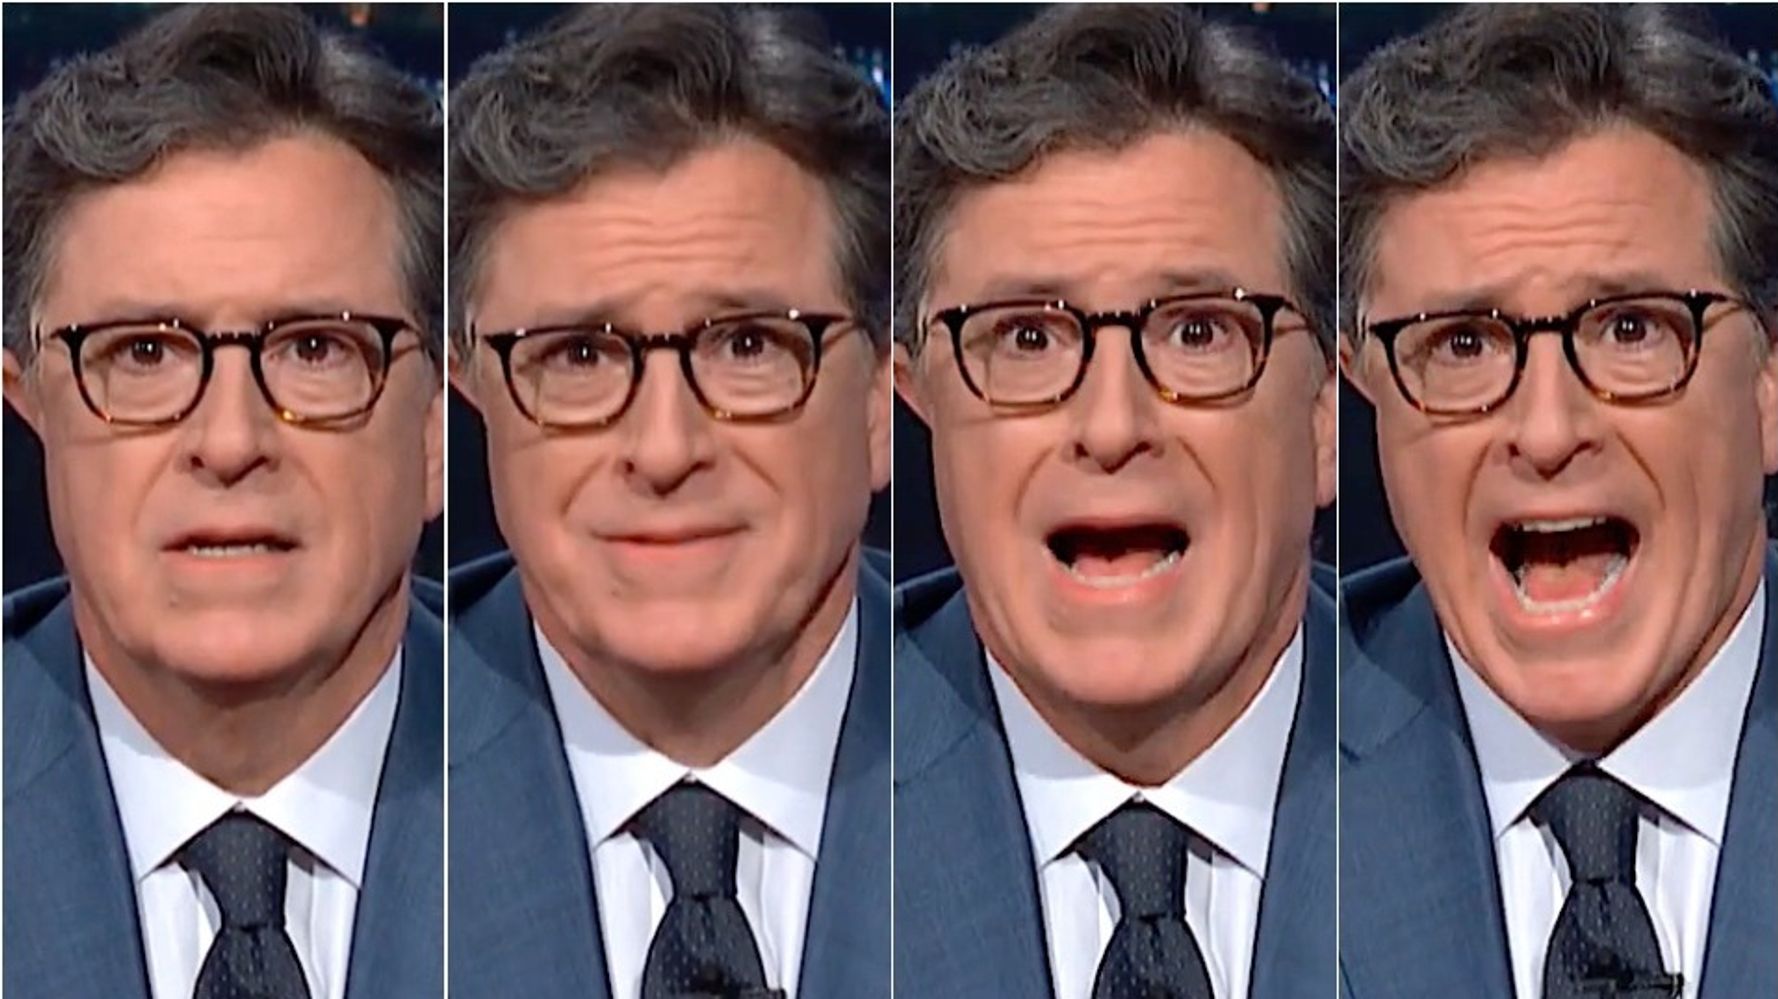 Colbert Loses It In Real-Time Over That Viral Video Of Steve From 'Blue's Clues'